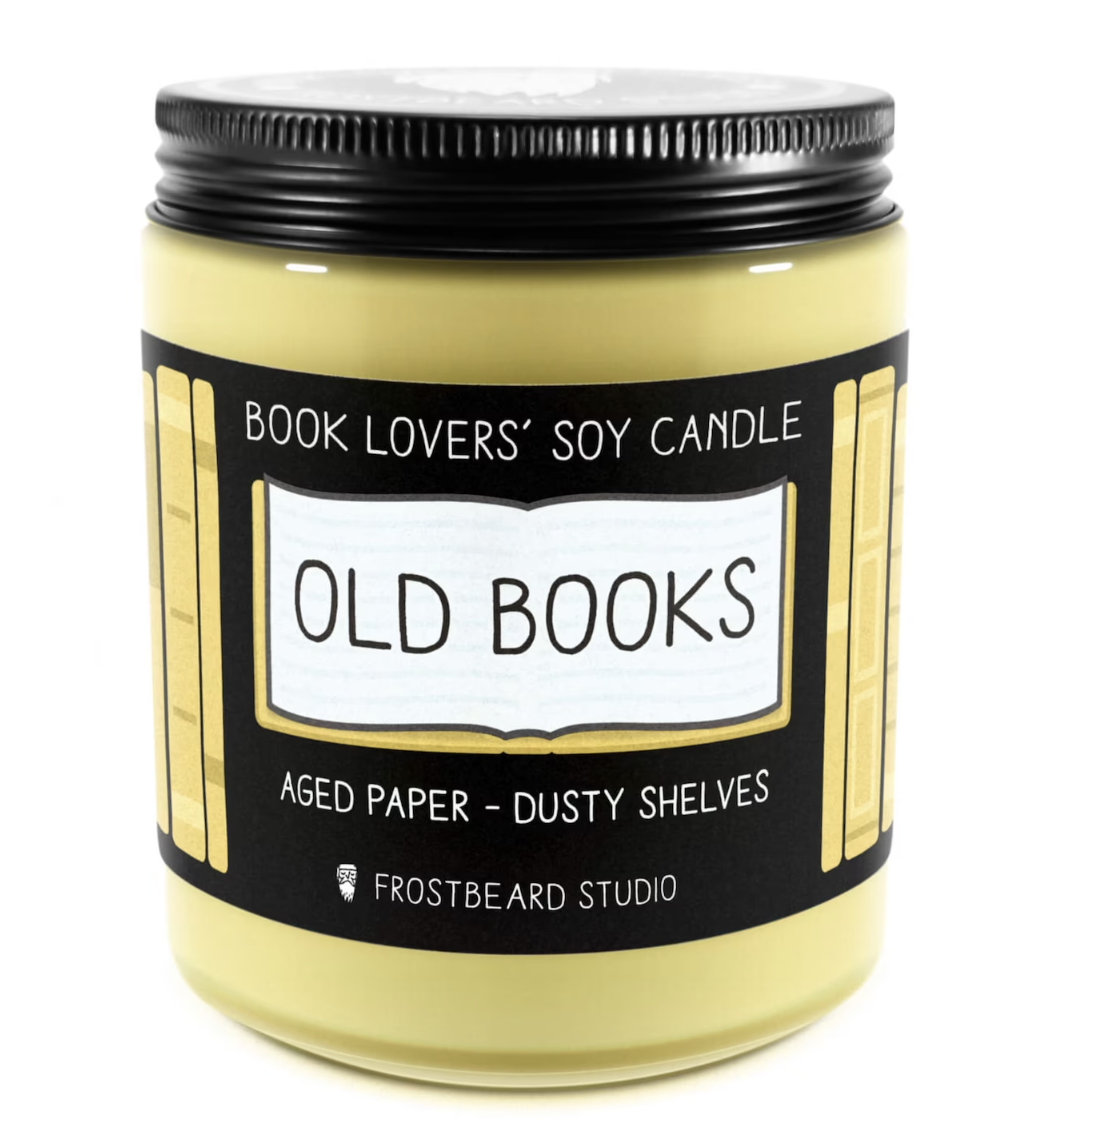 A yellow candle in a clear glass jar with a black lid and a label that says "OLD BOOKS".